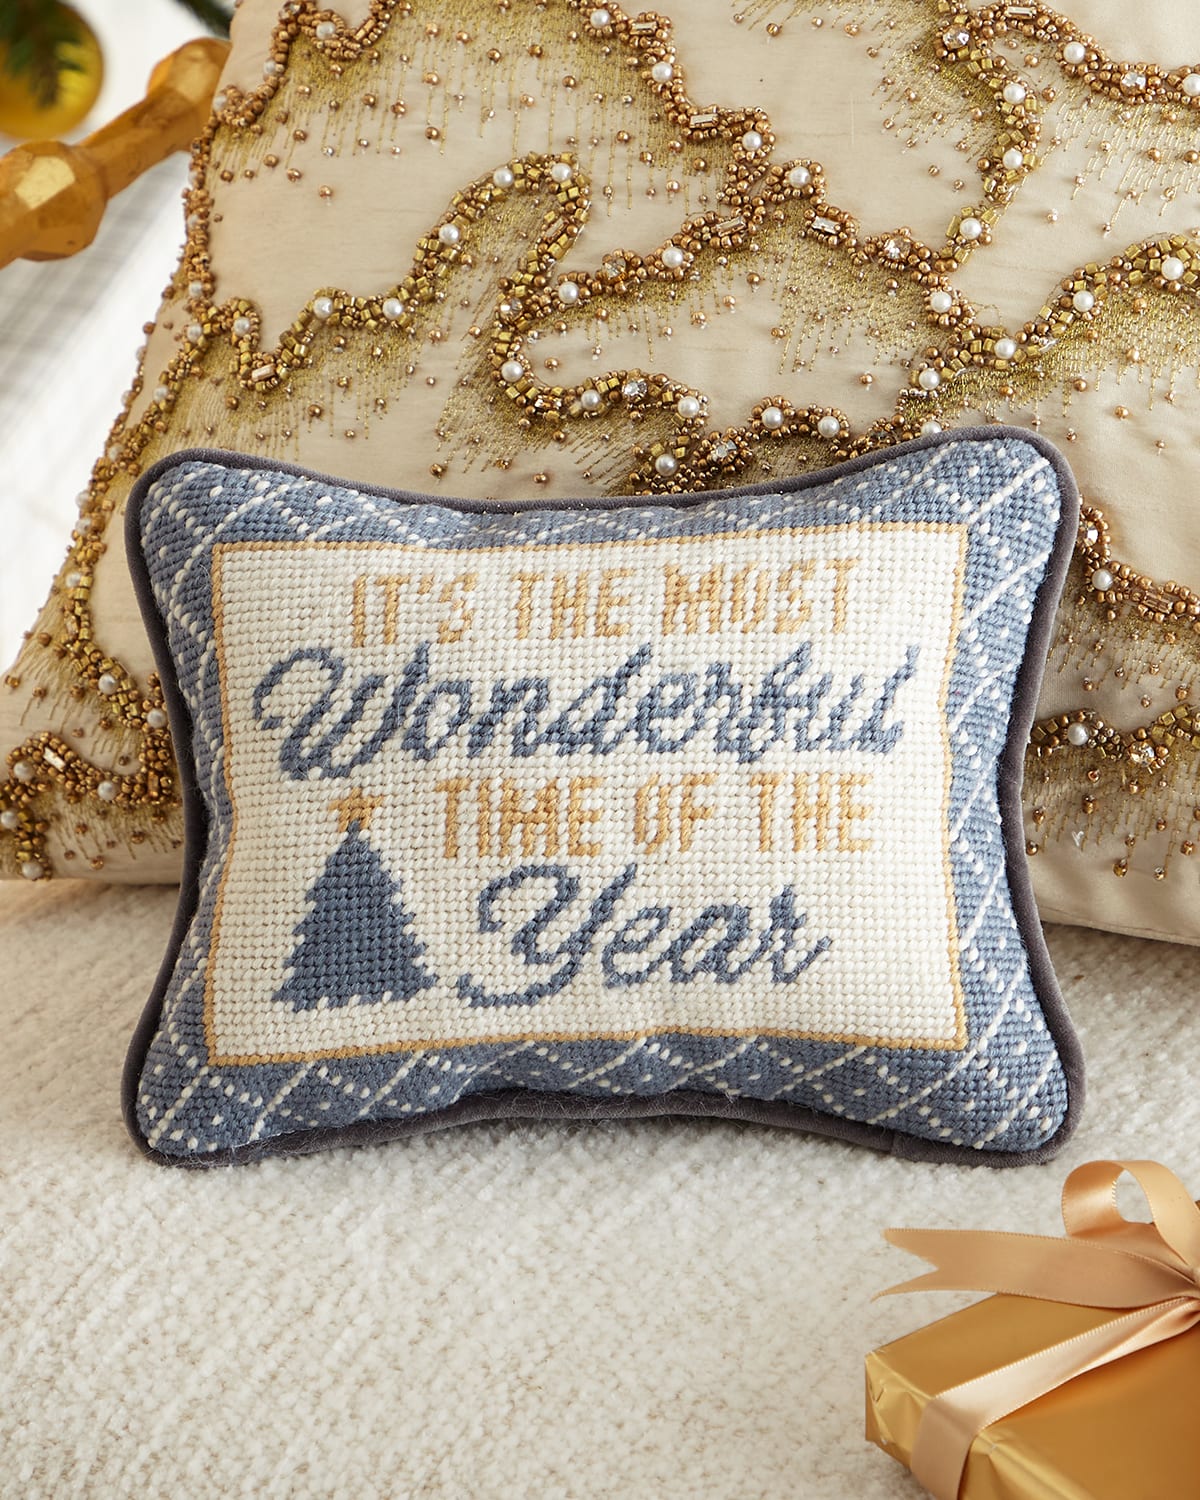 The Most Wonderful Time of the Year Needlepoint Christmas Pillow, 6.5" x 9"